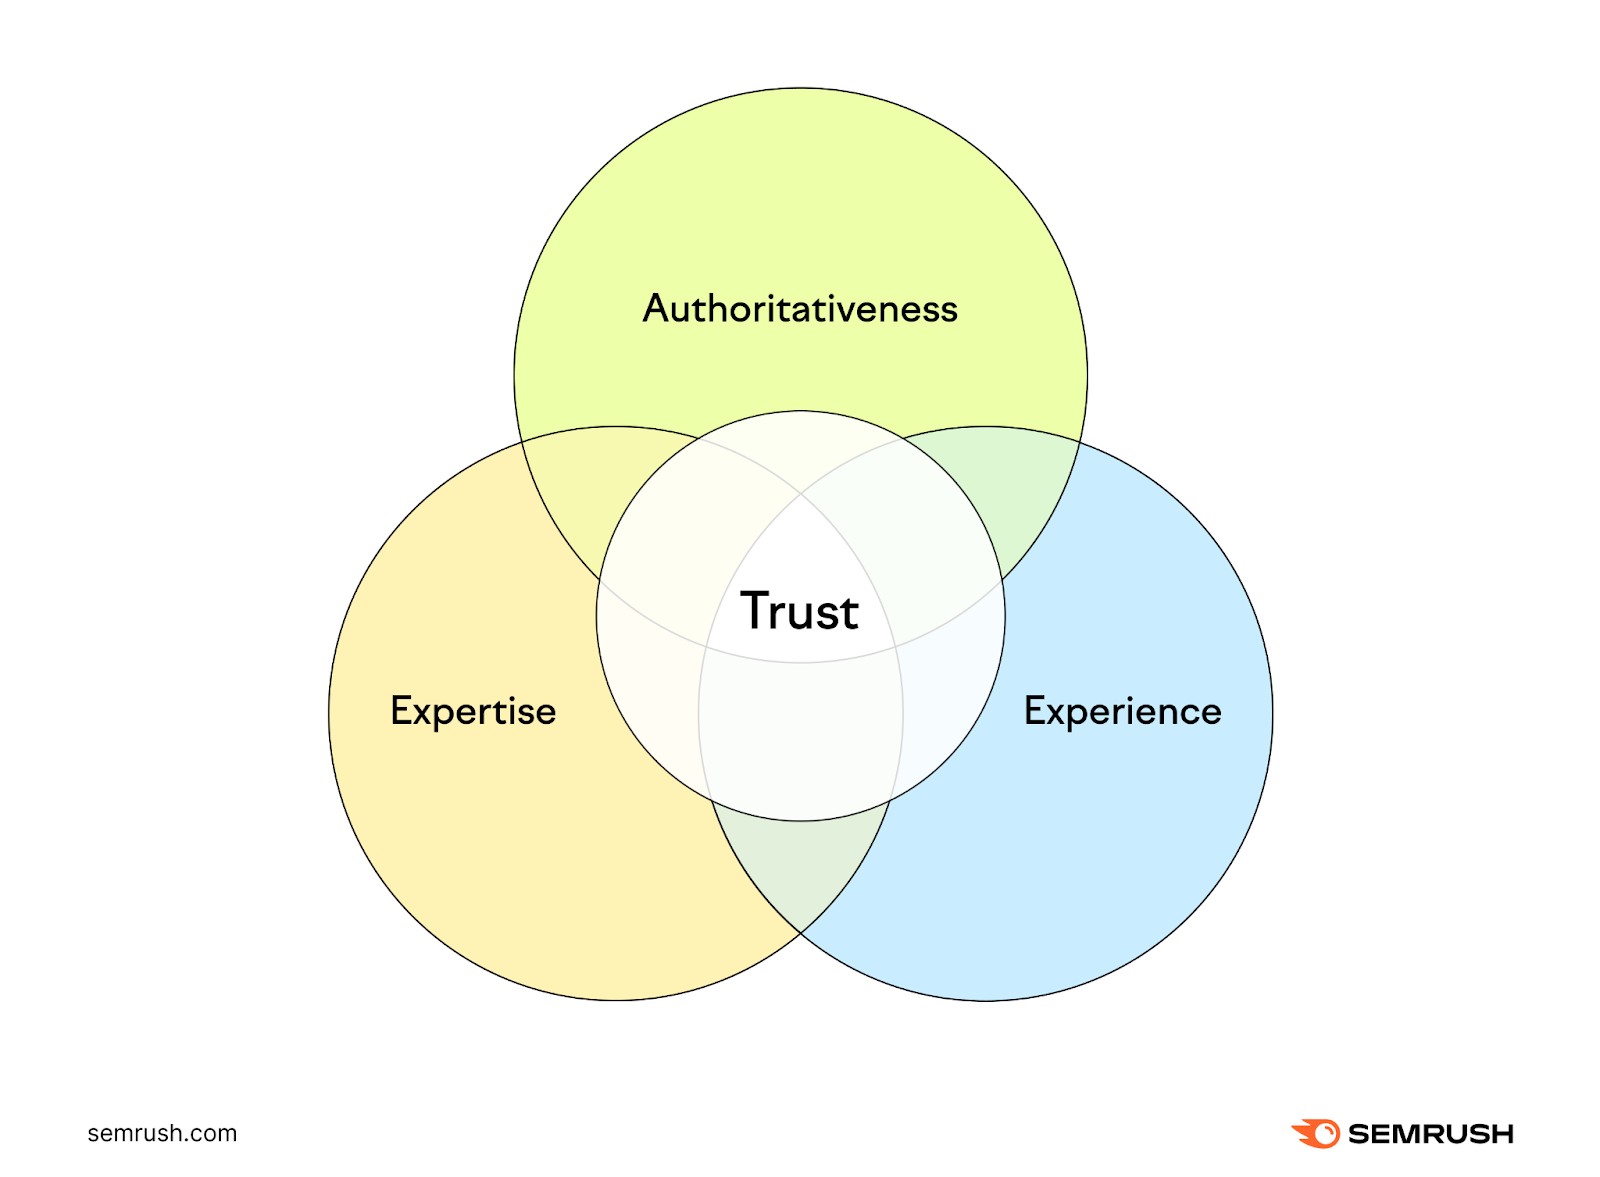 A diagram showing Experience, Expertise, Authoritativeness, and Trust